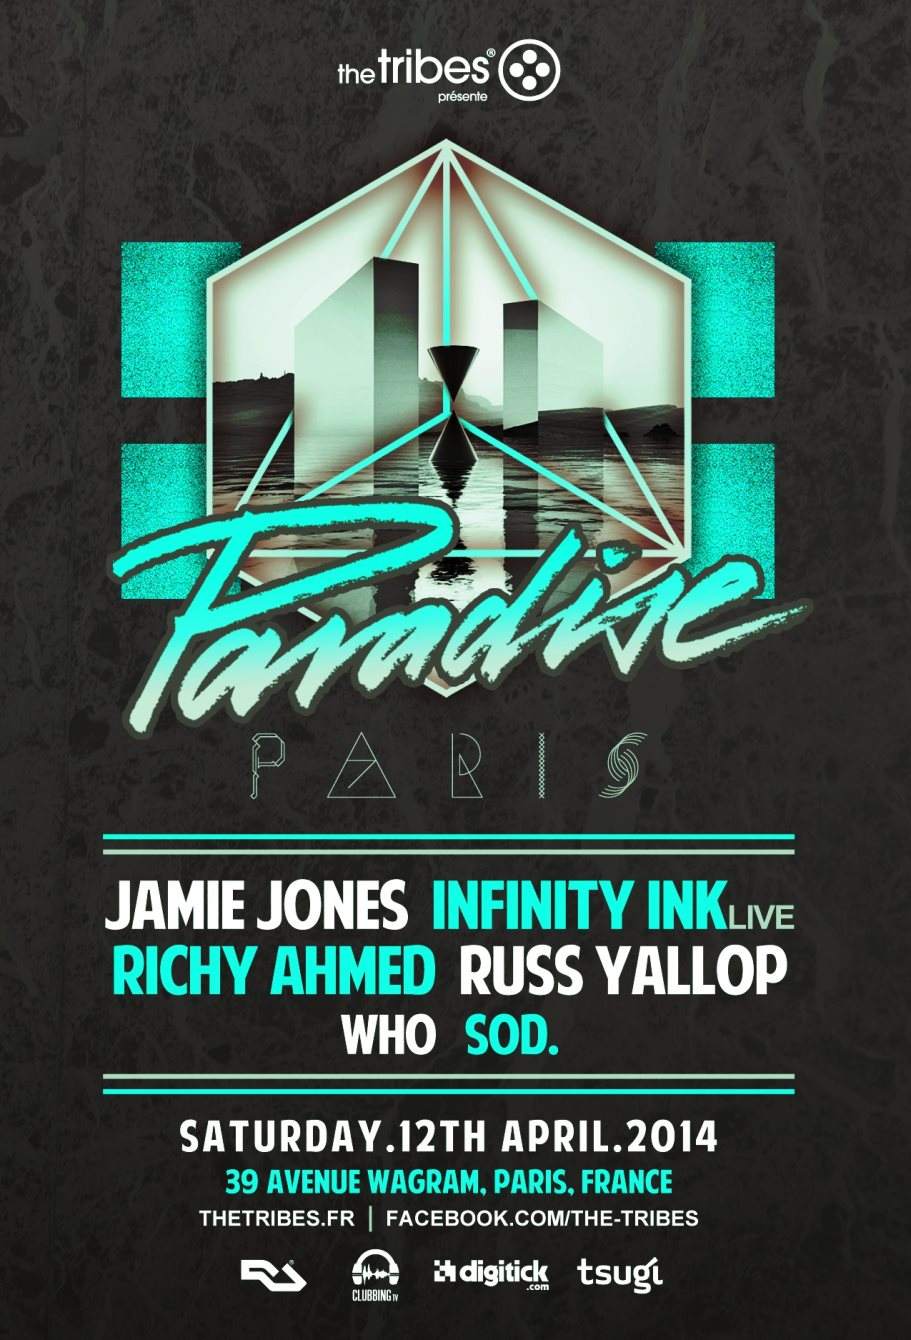 The Tribes presents Paradise with Jamie Jones, Infinity INK Live, Richy Ahmed, Russ Yallop - Página frontal